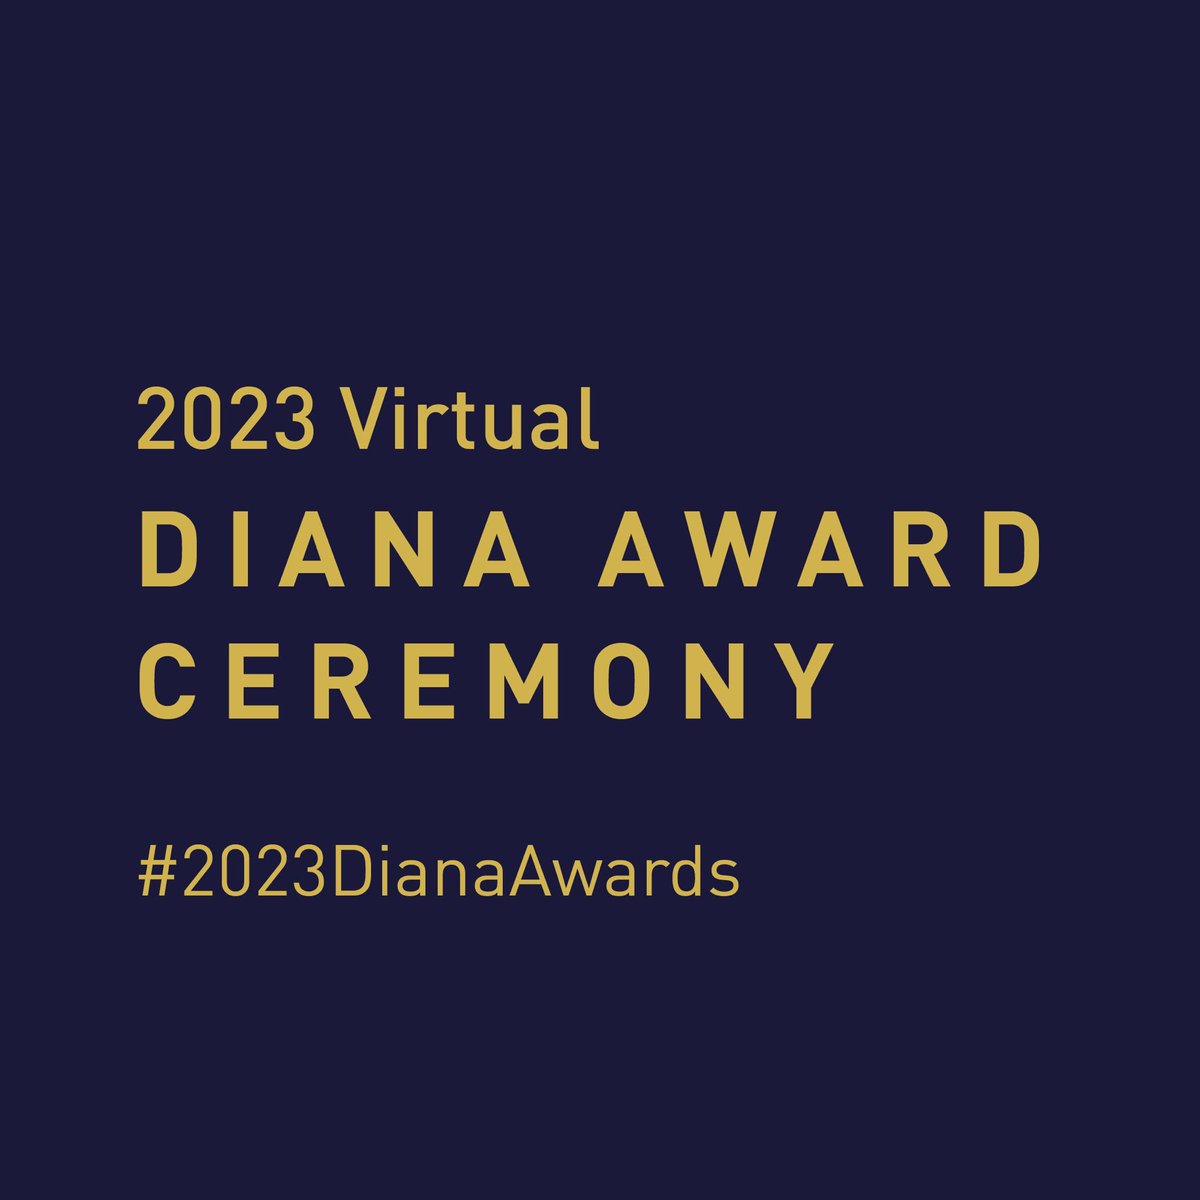 I am so so excited to at last be able to announce that I’m receiving a @DianaAward  today! 

Watch the #2023DianaAwards virtual ceremony to support me and other young visionaries and leaders today at 15:00 BST. Get your free ticket: lnkd.in/ew3xzez2